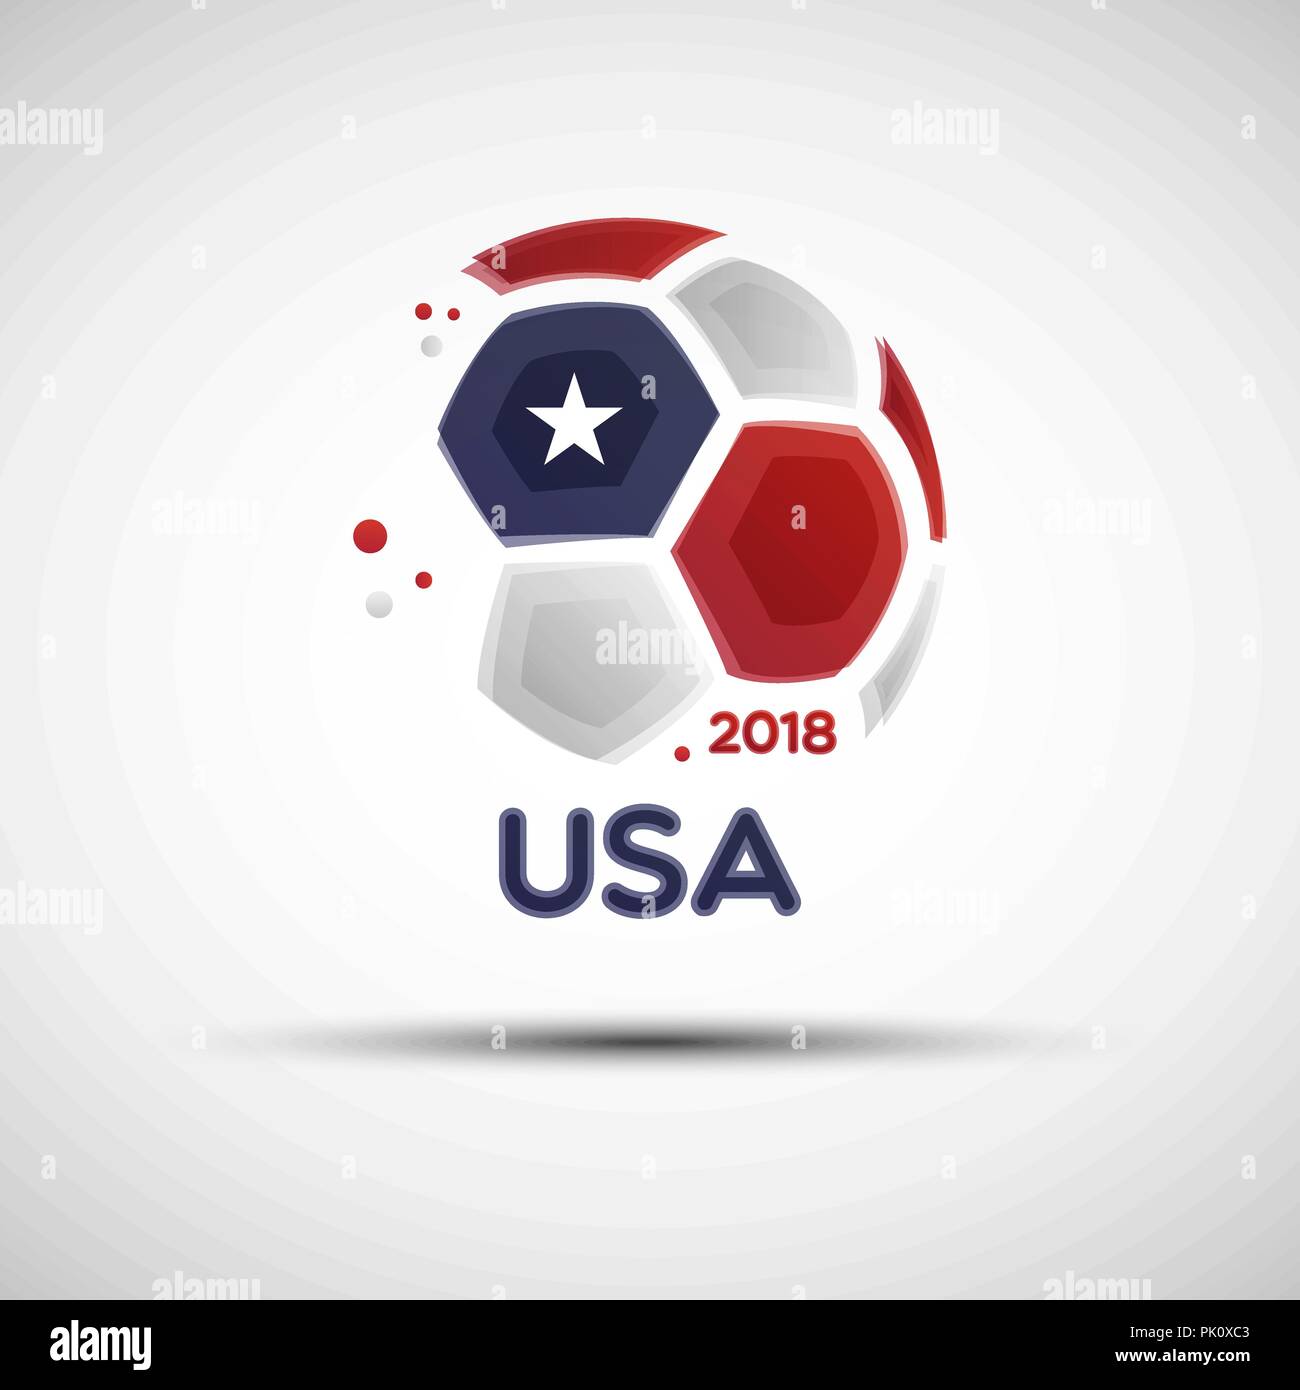 Football championship banner. Flag of USA. Vector illustration of abstract soccer ball with United States of America national flag colors Stock Vector